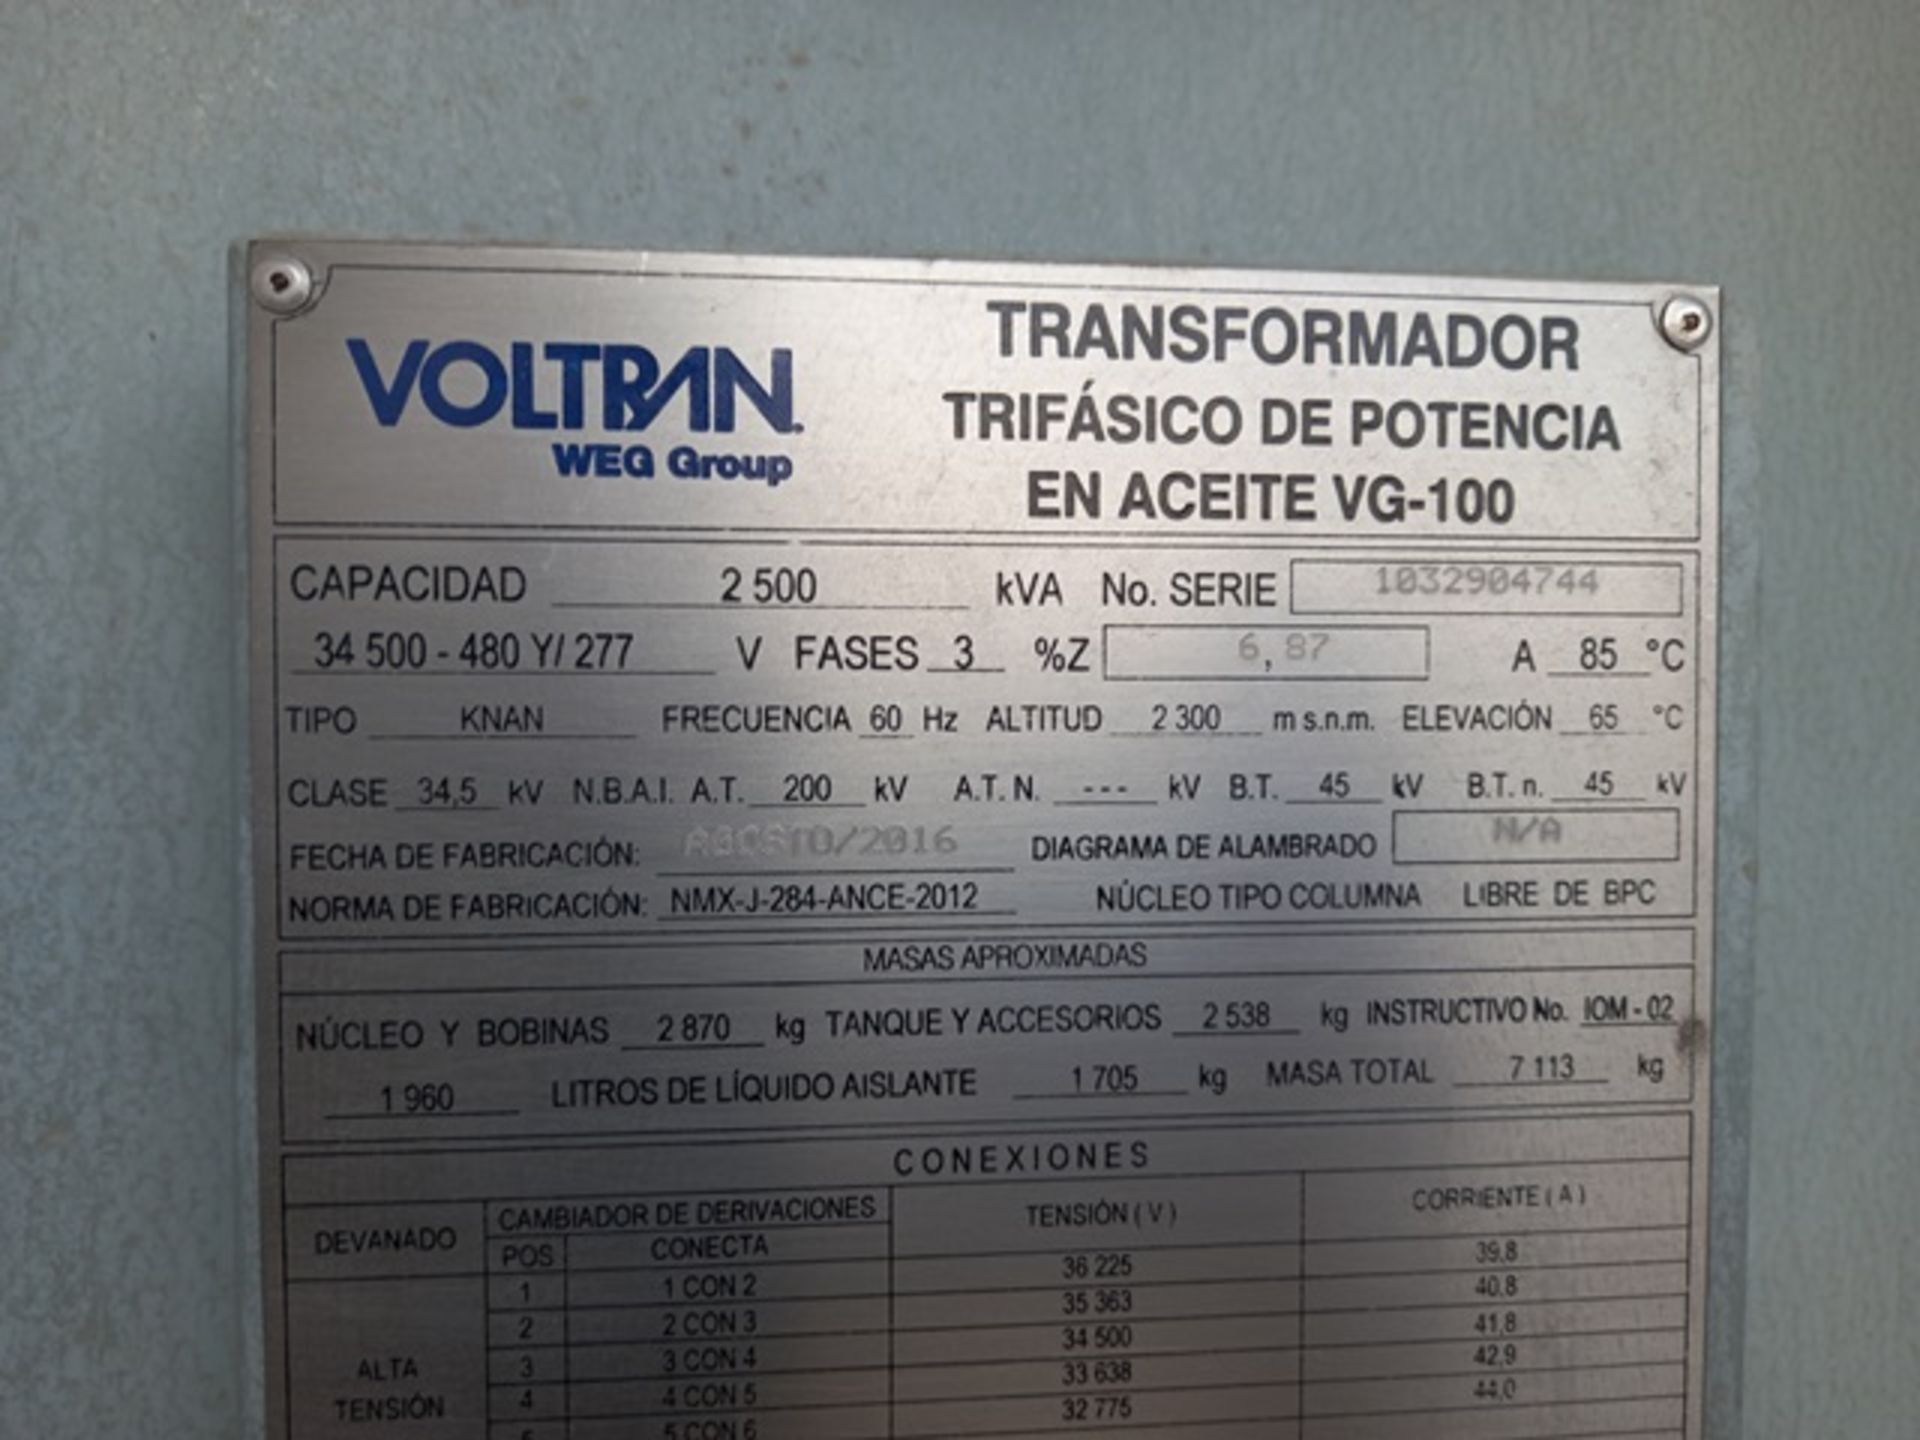 2500 KVA Electric Transformer, 34,500-480Y/277 V, Serial Number: 1032904744, Year 2016 - Image 6 of 7